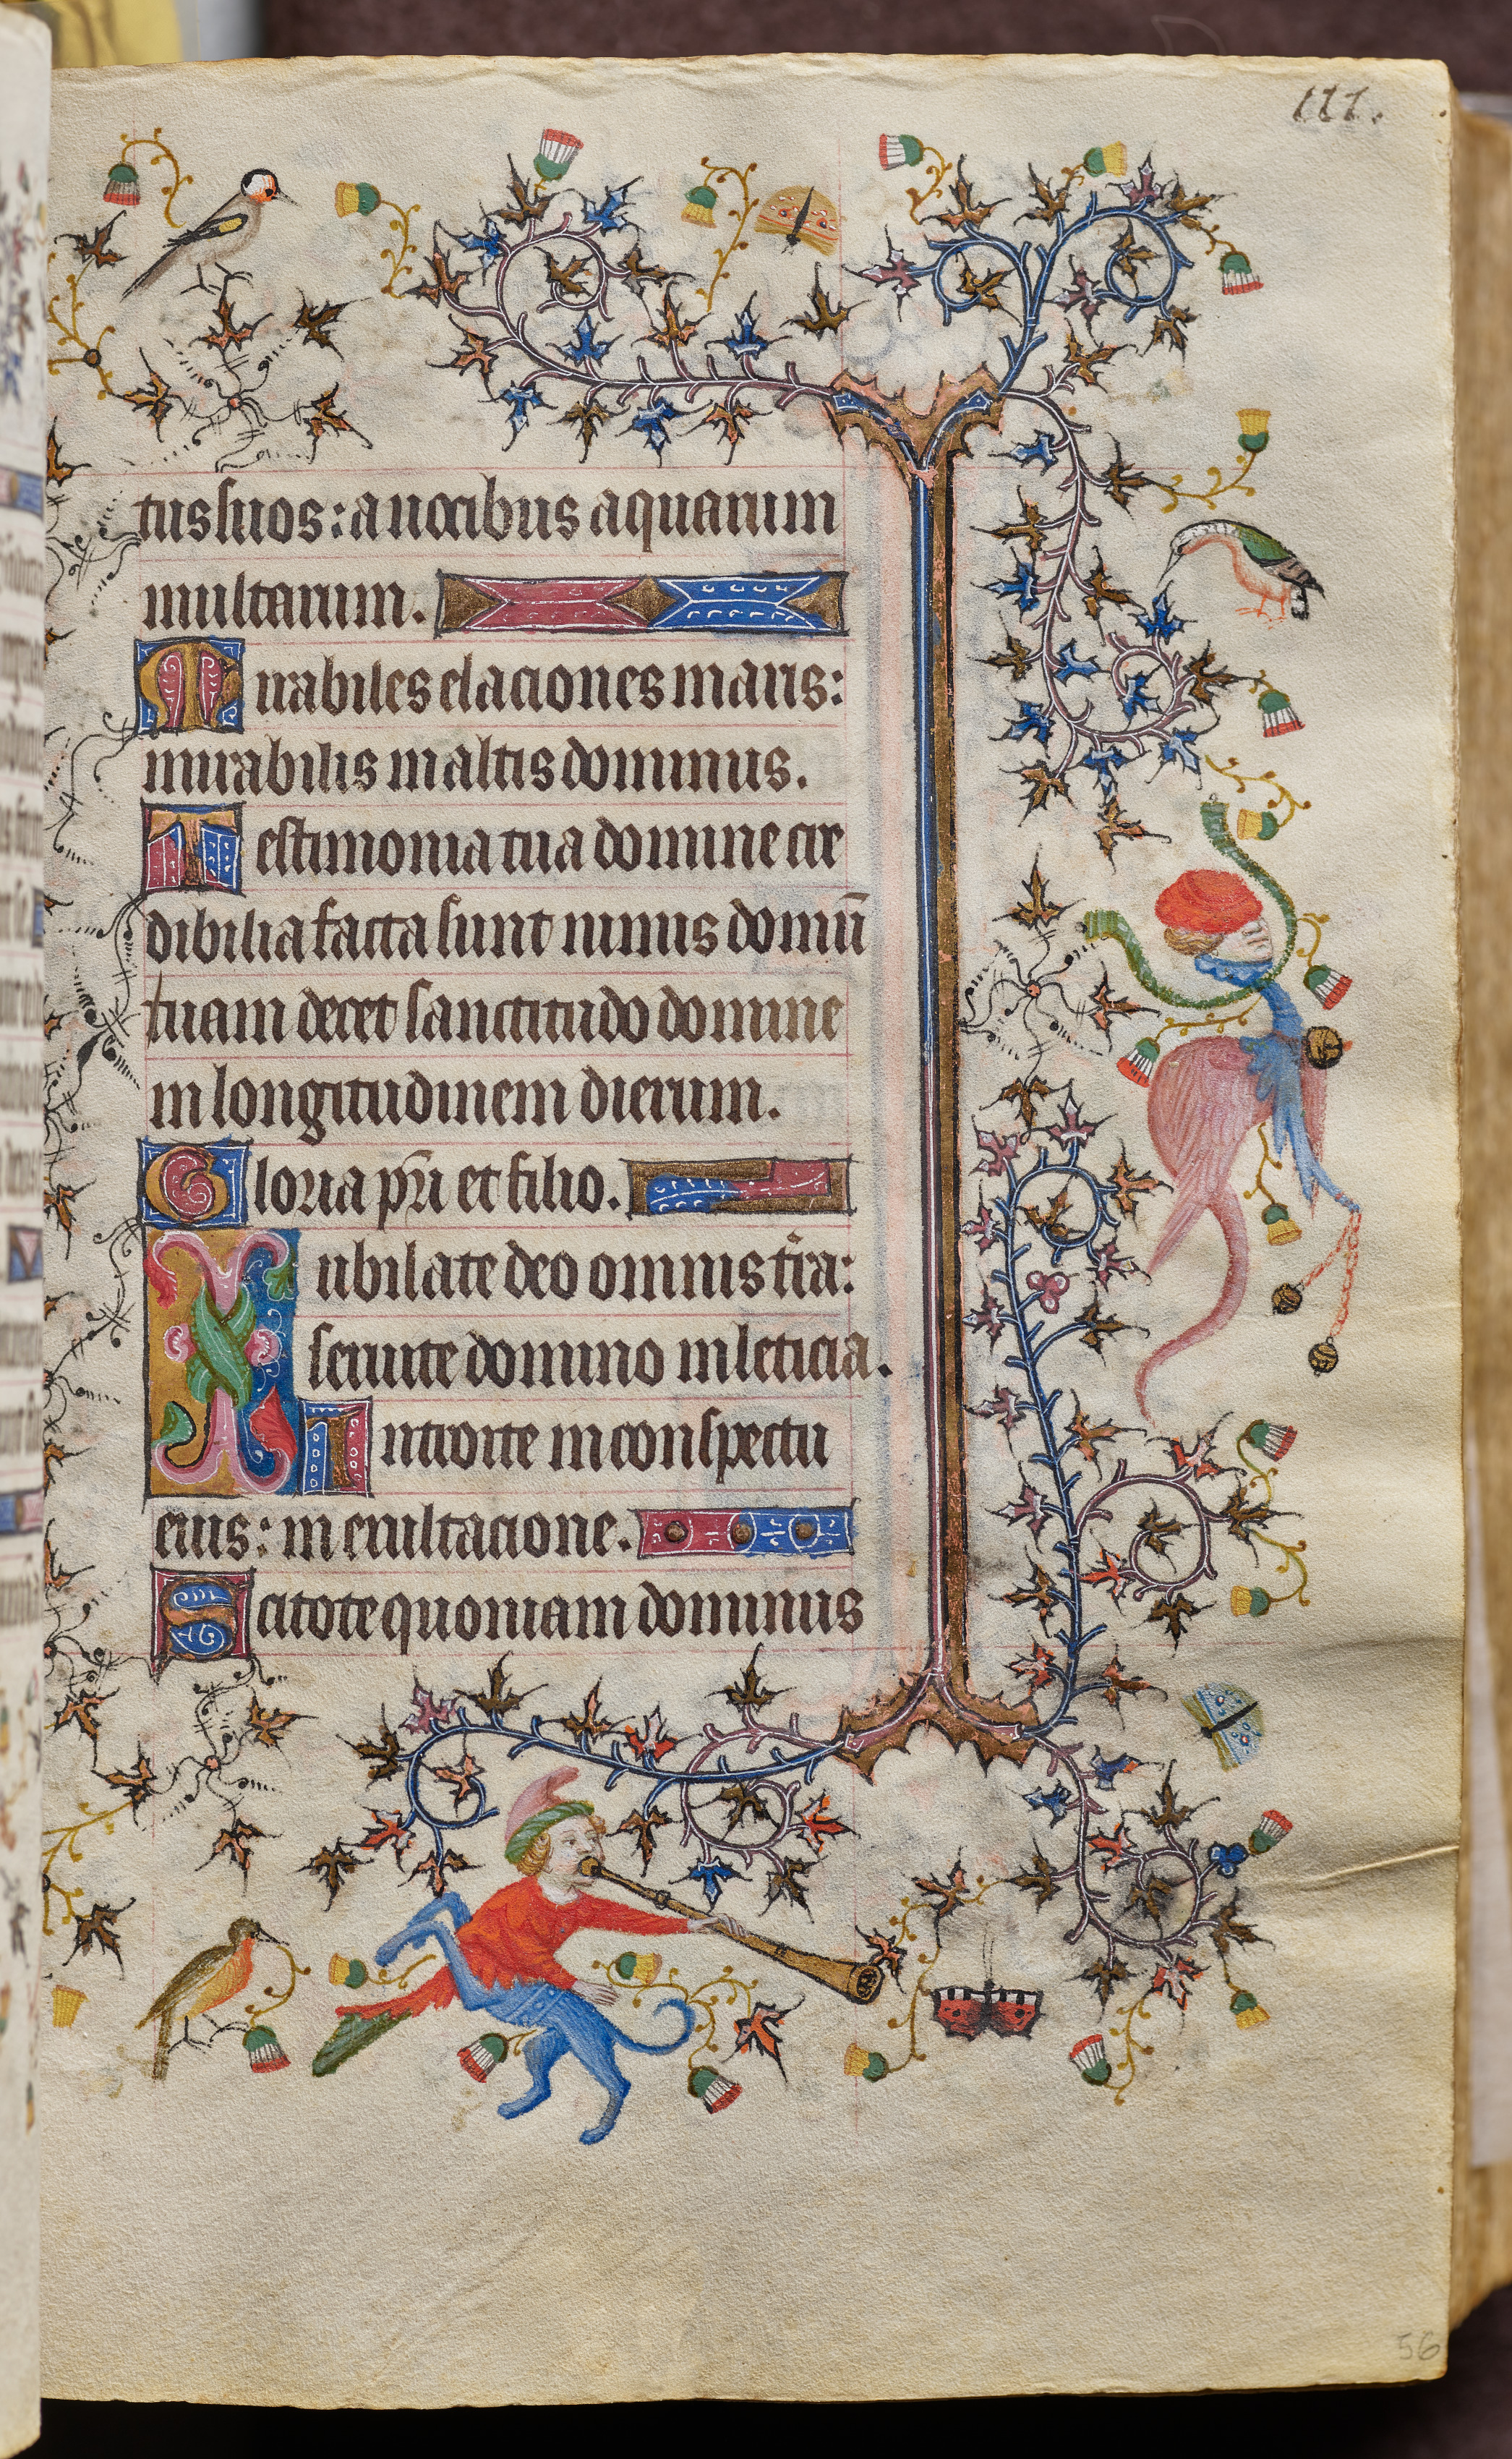 Hours of Charles the Noble, King of Navarre (1361-1425): fol. 56r, Text